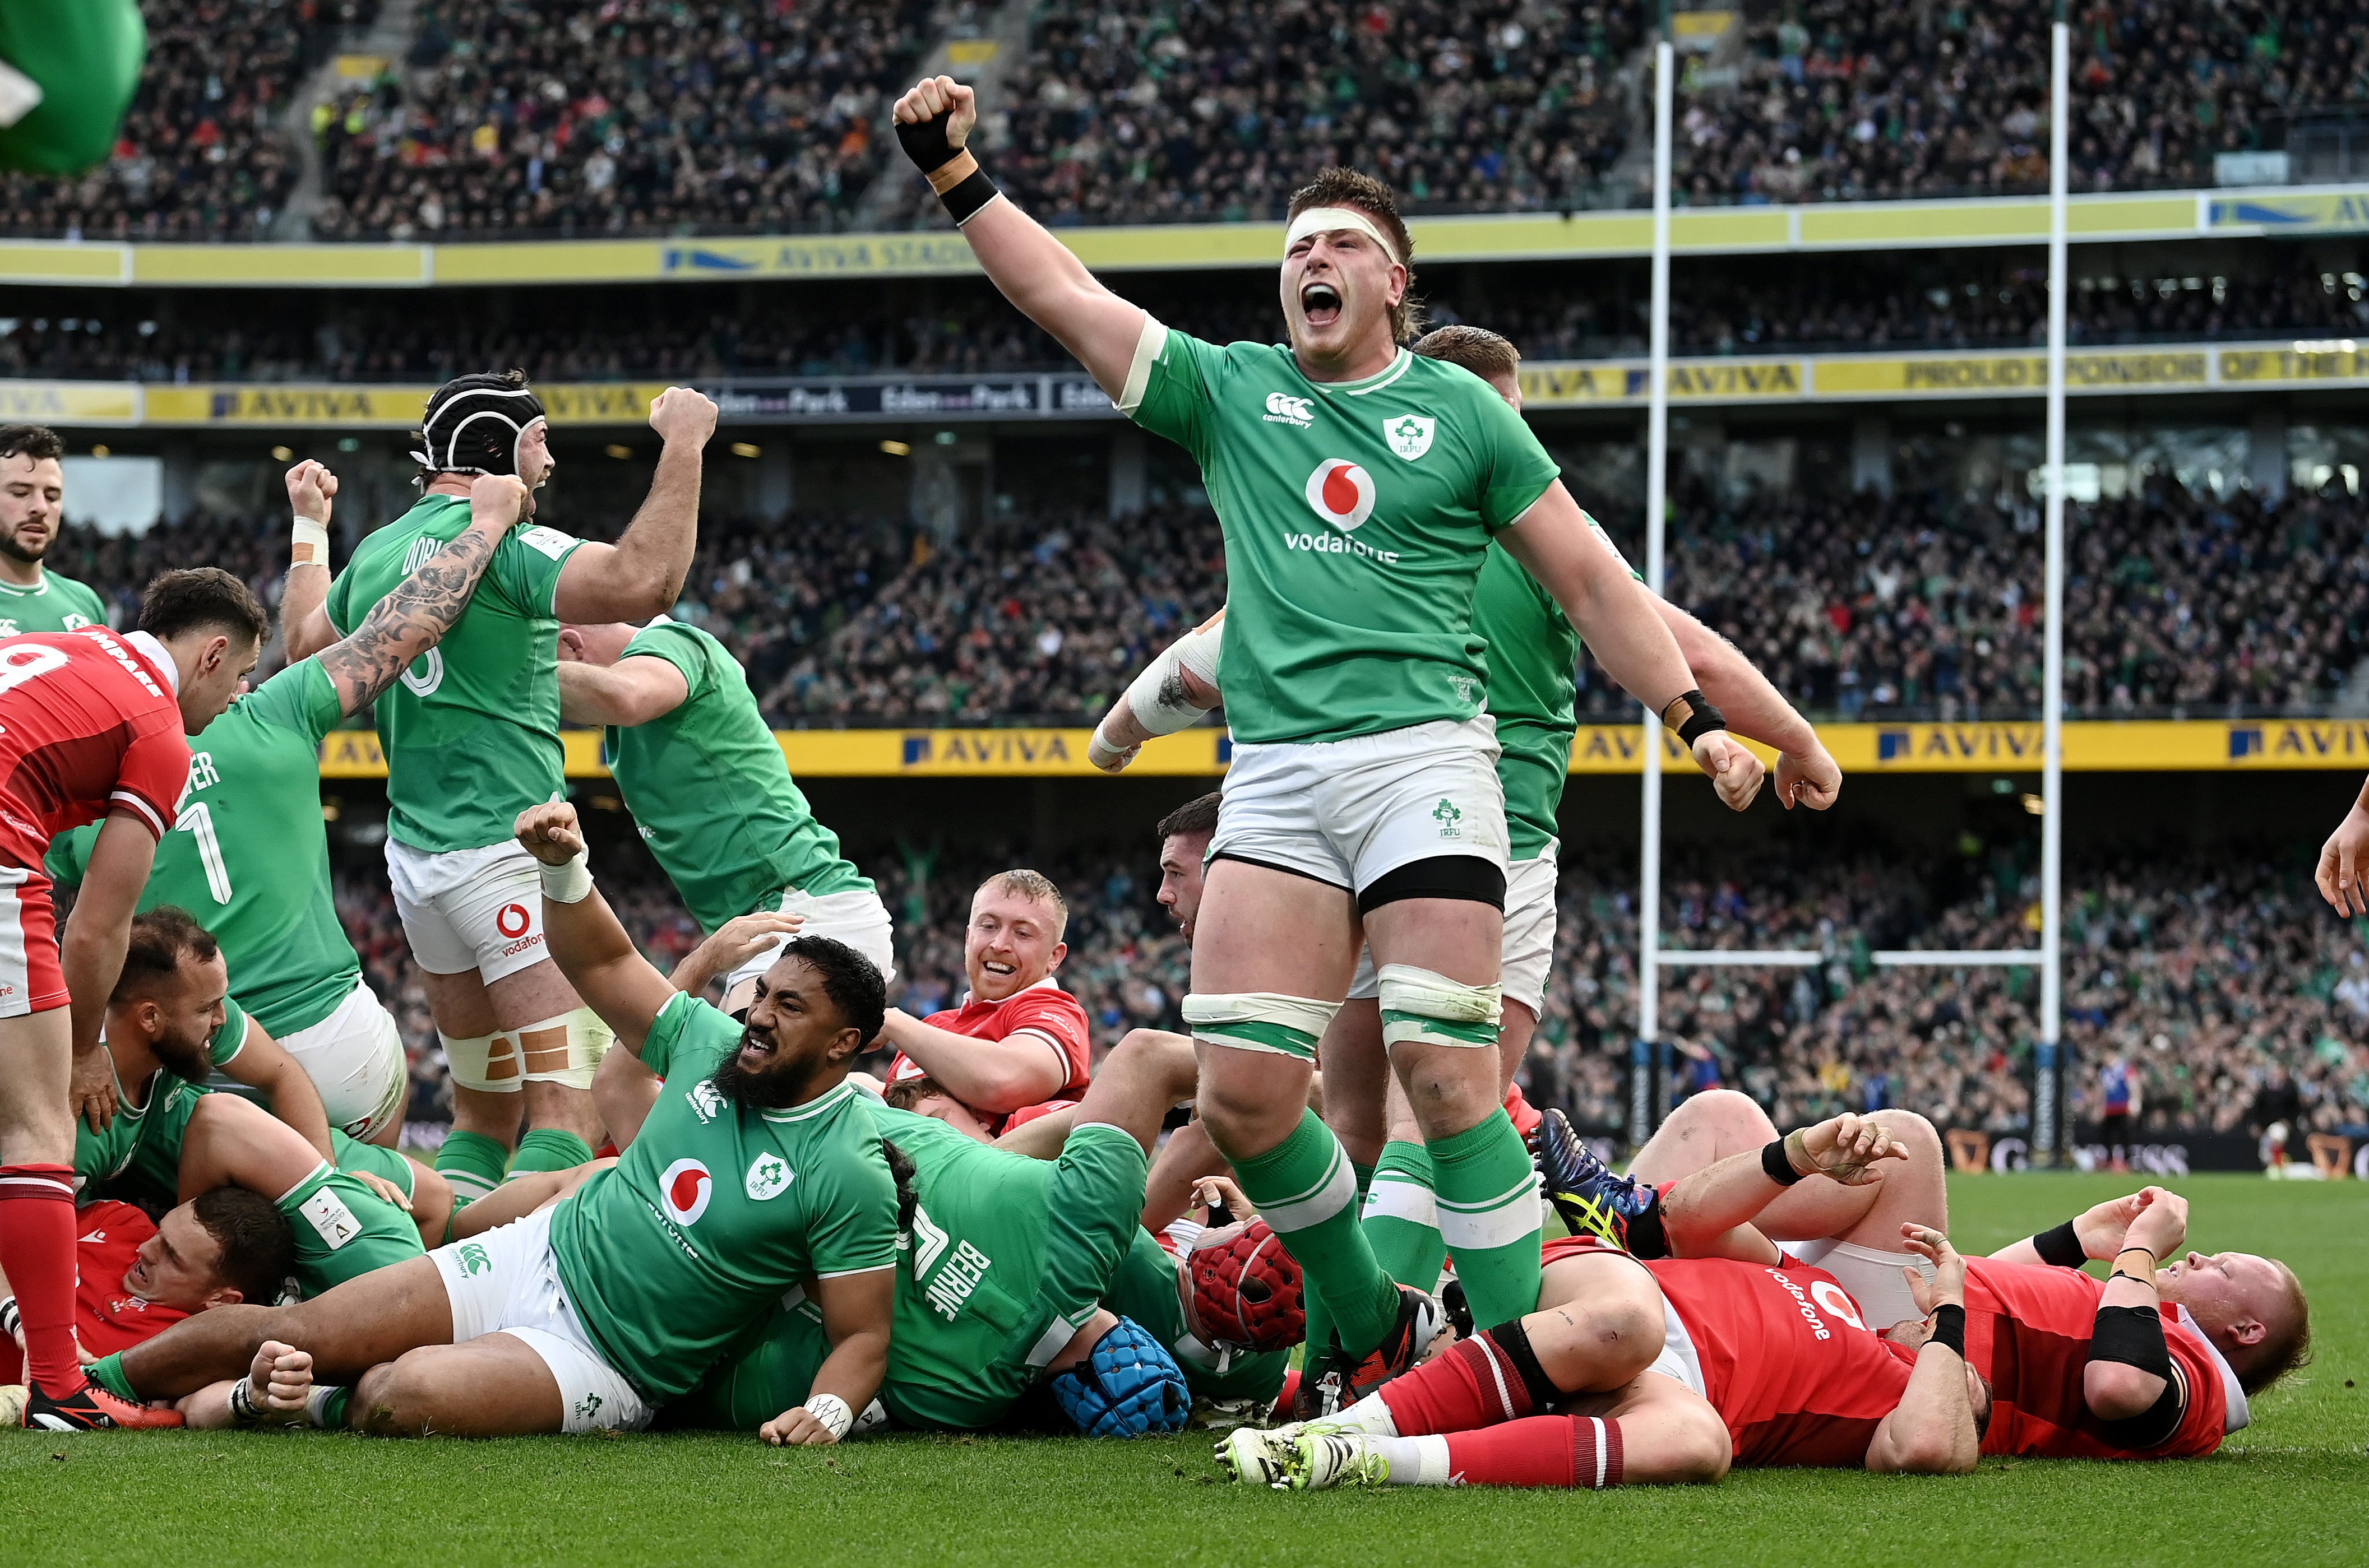 Ireland have been unstoppable in this Six Nations